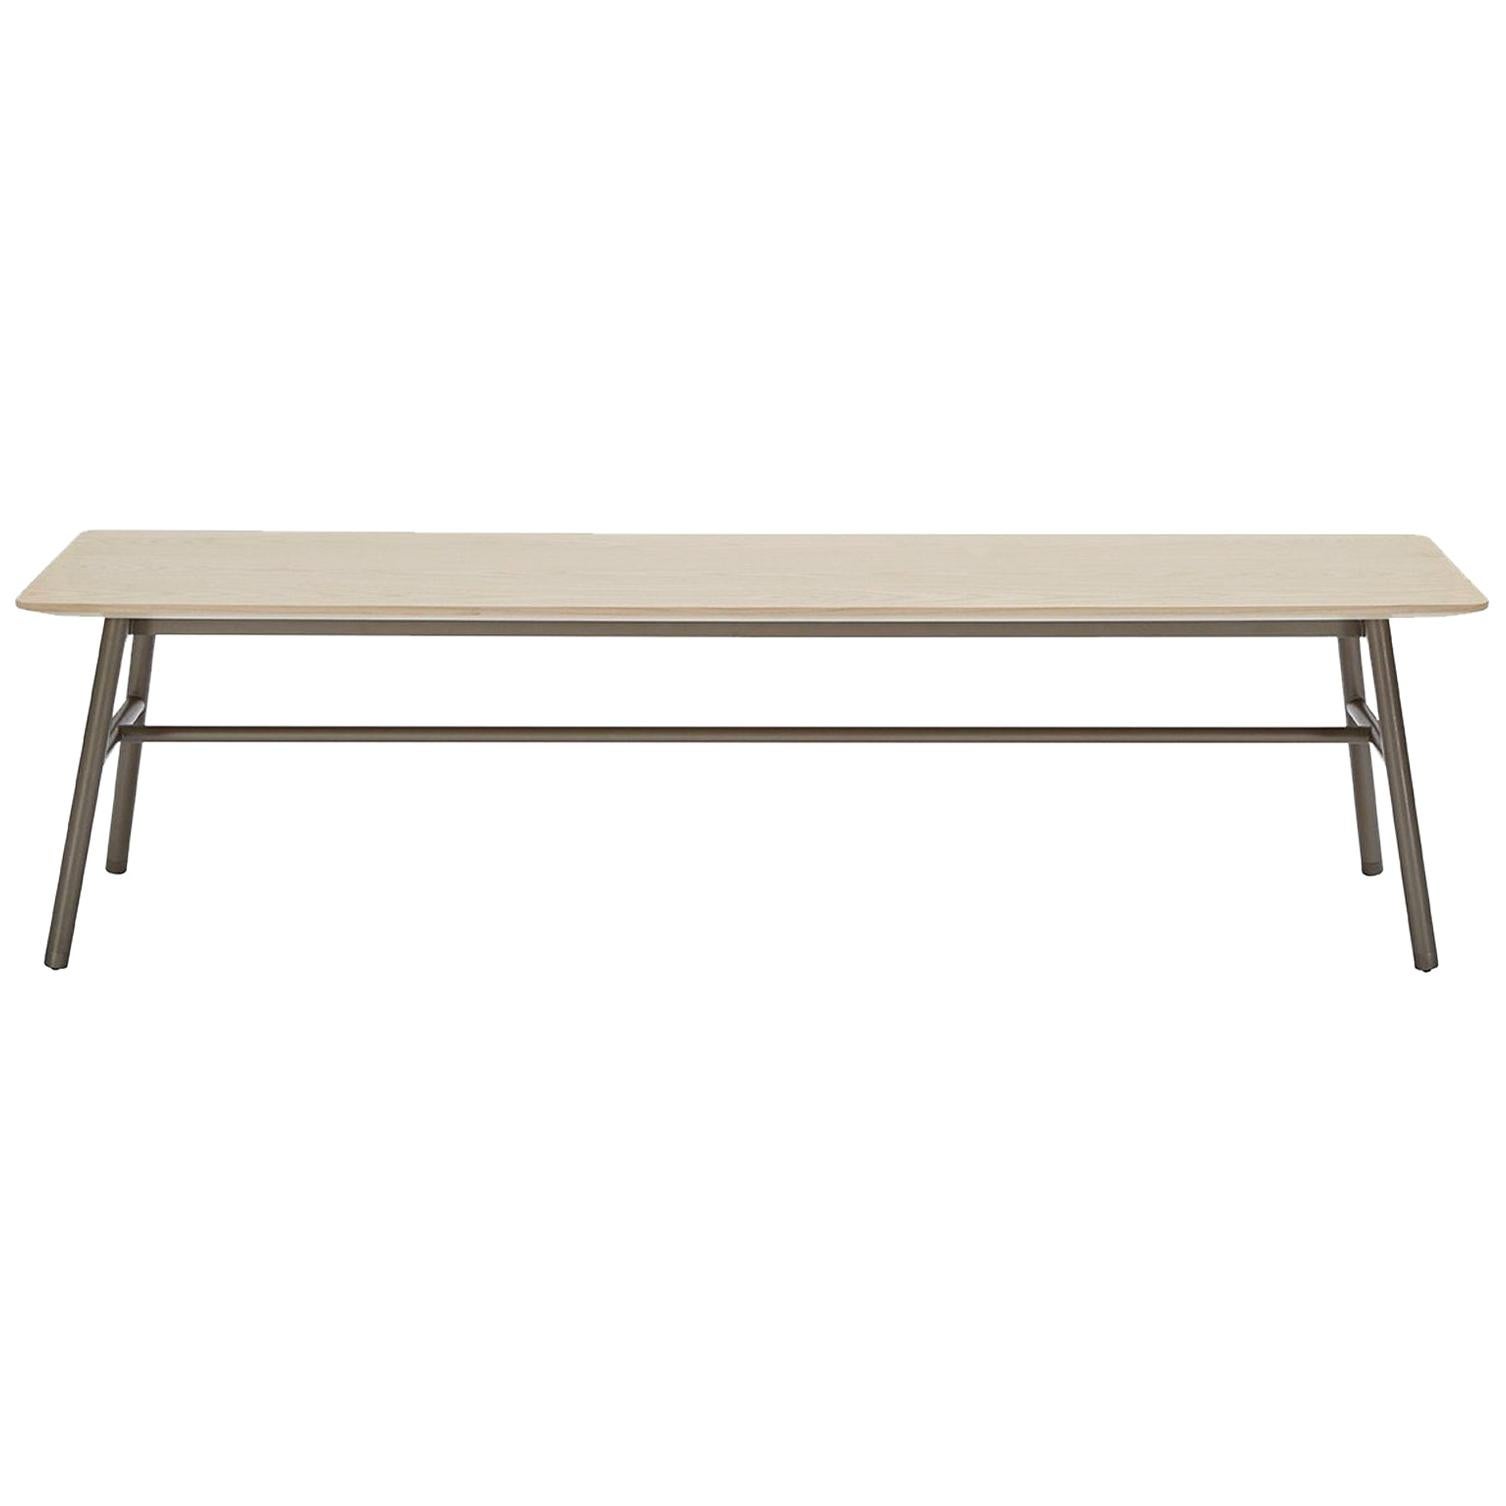 SP01 Holland Short Bench in Natural Ash, Made in Italy For Sale